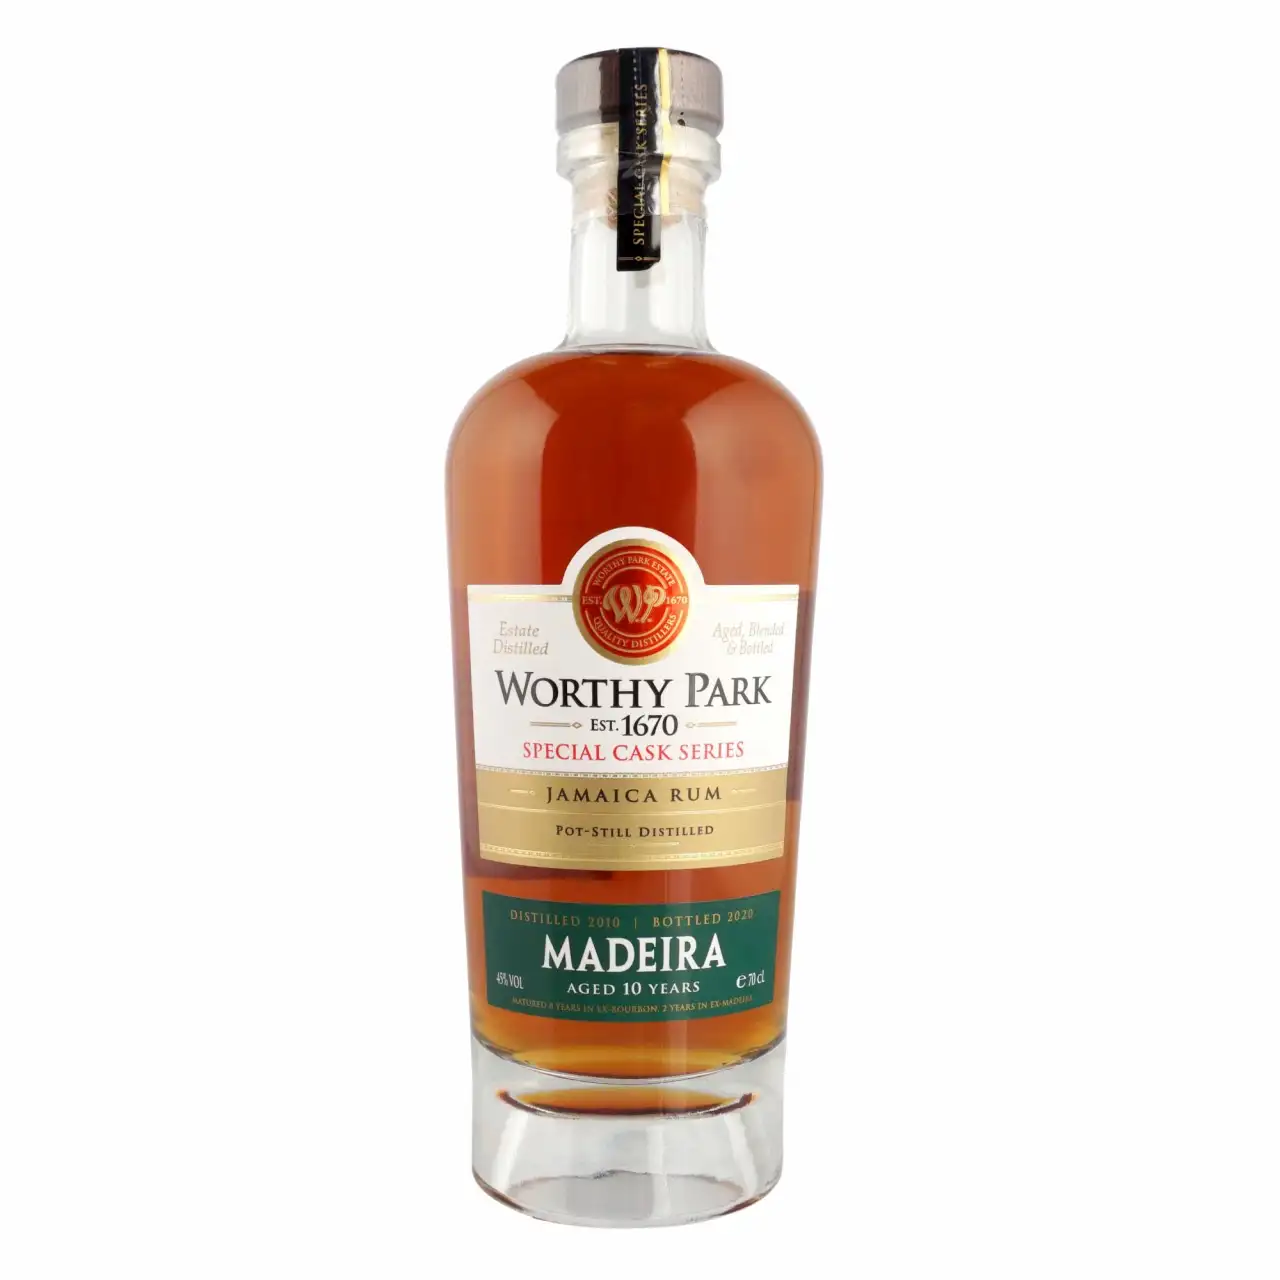 Image of the front of the bottle of the rum Special Cask Series Madeira